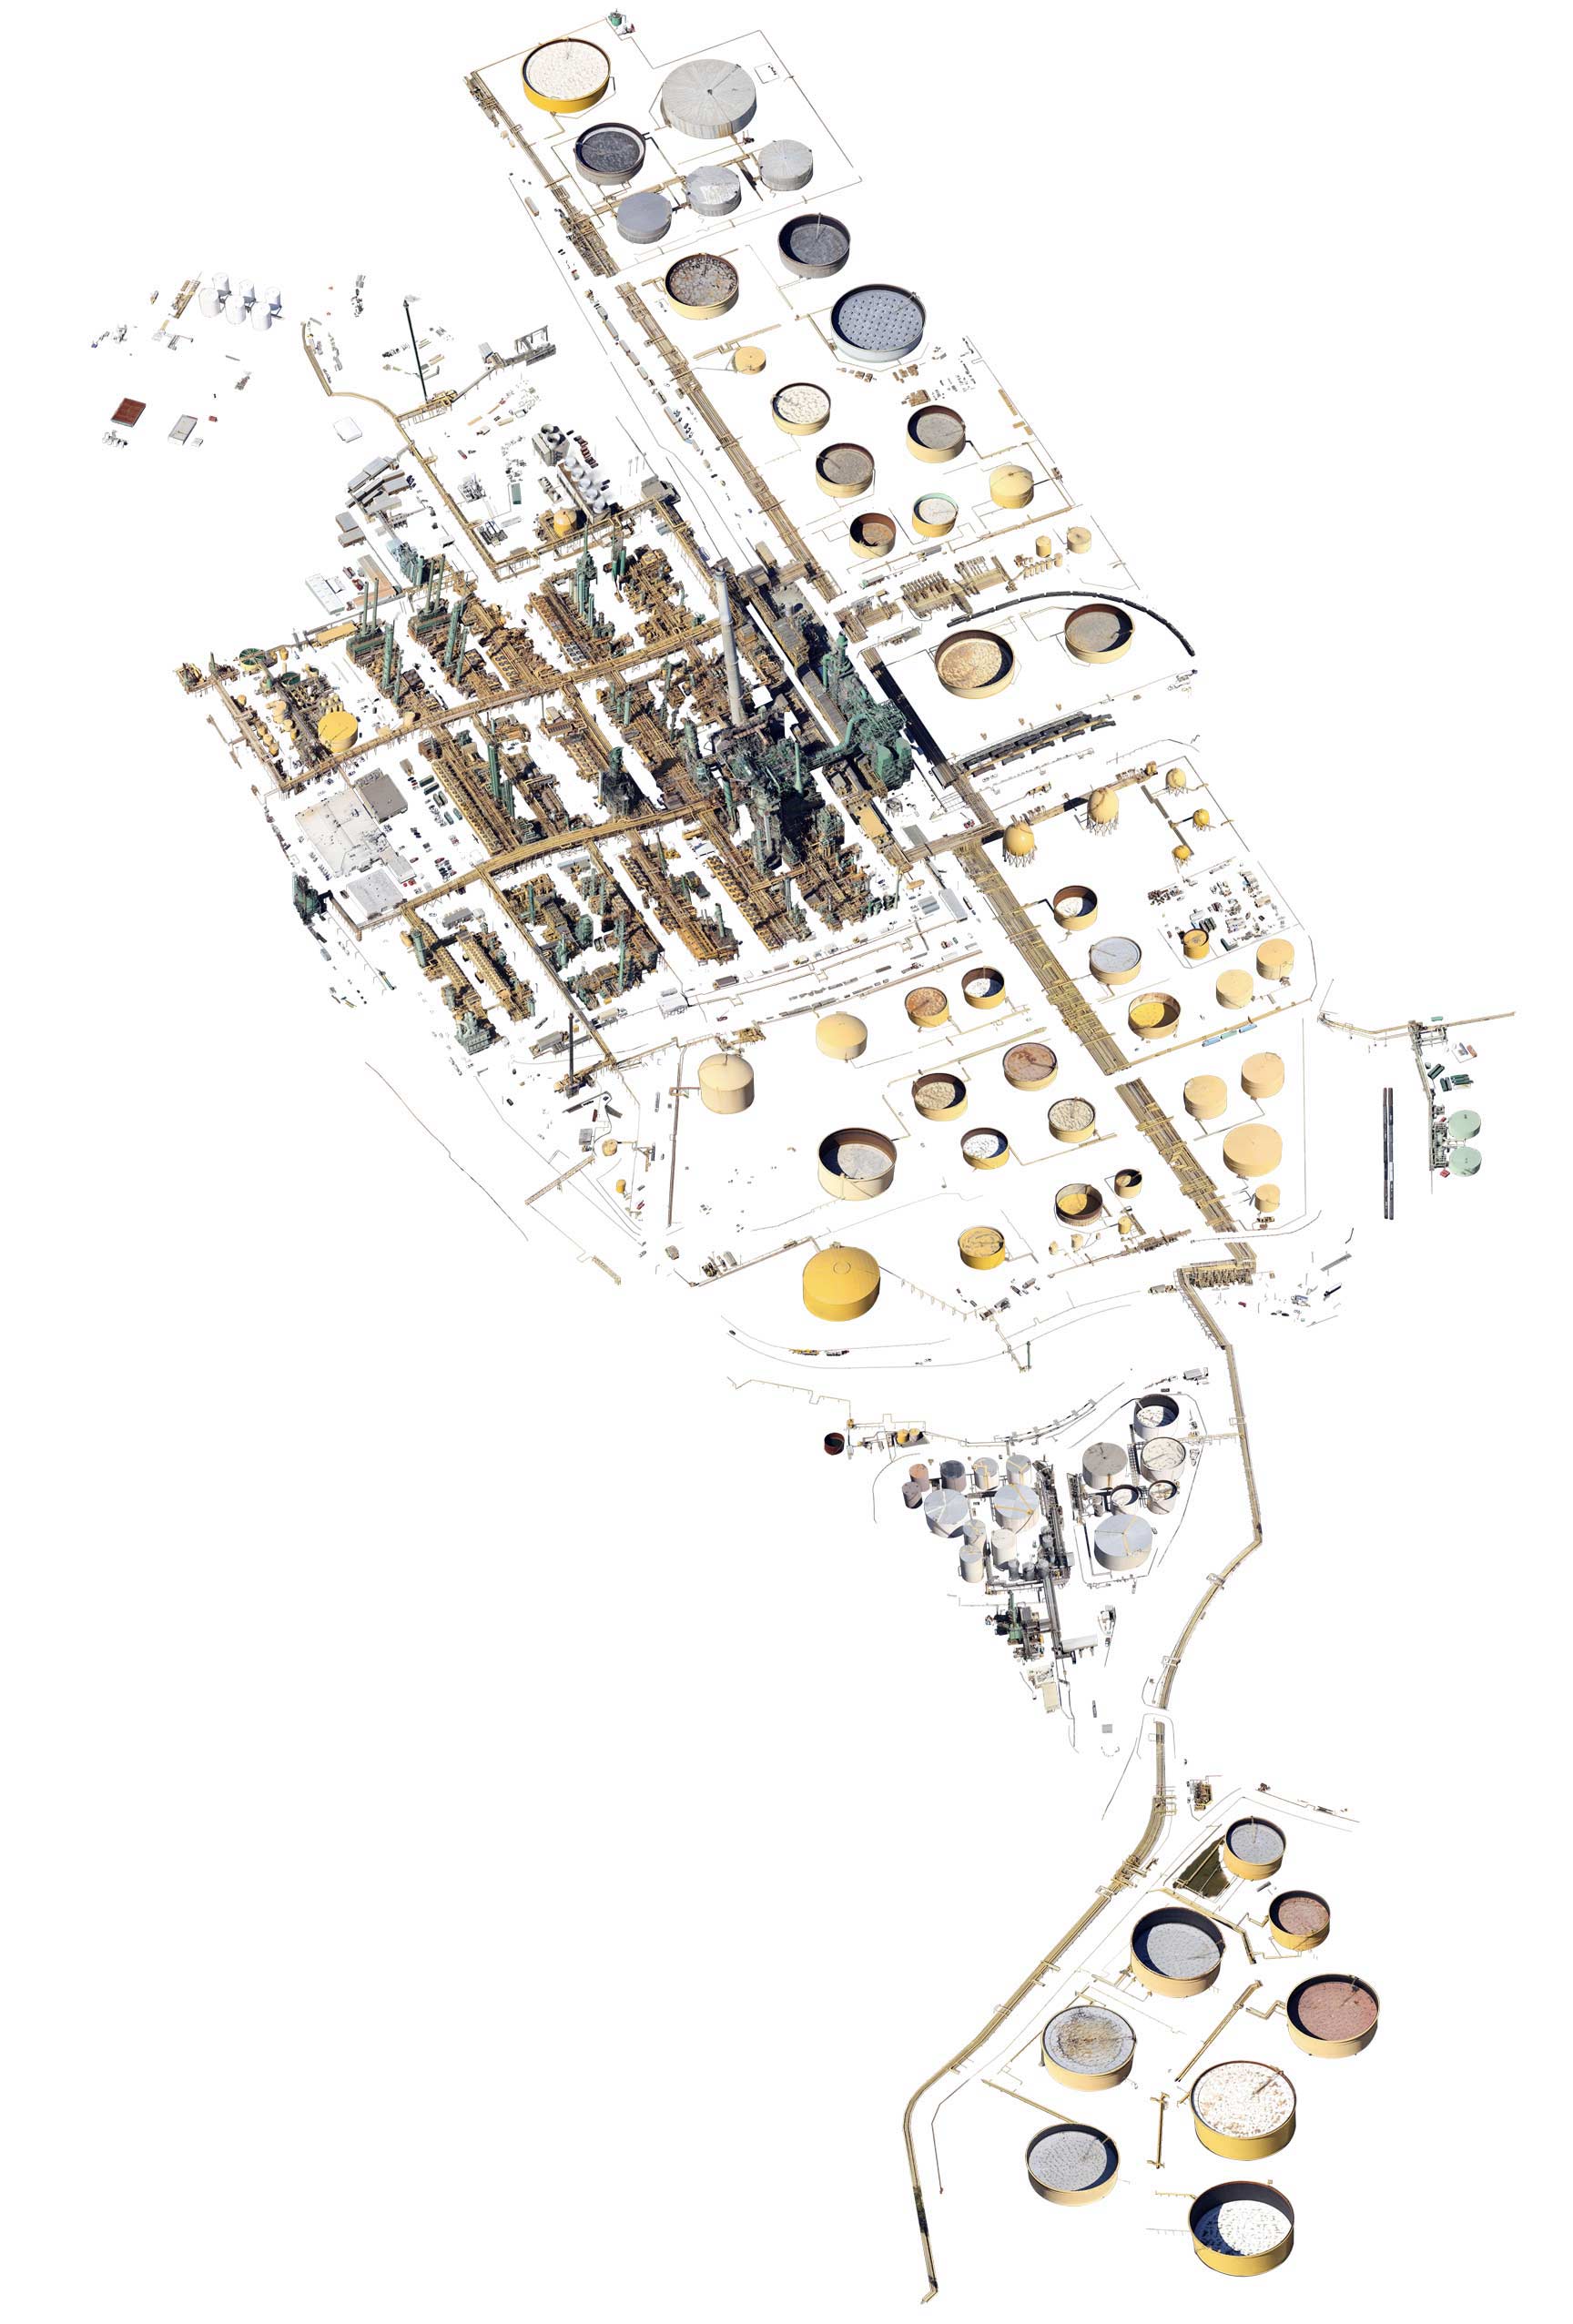 Isolated satellite imagery of an oil refinery including oil drums, towers, and pipelines